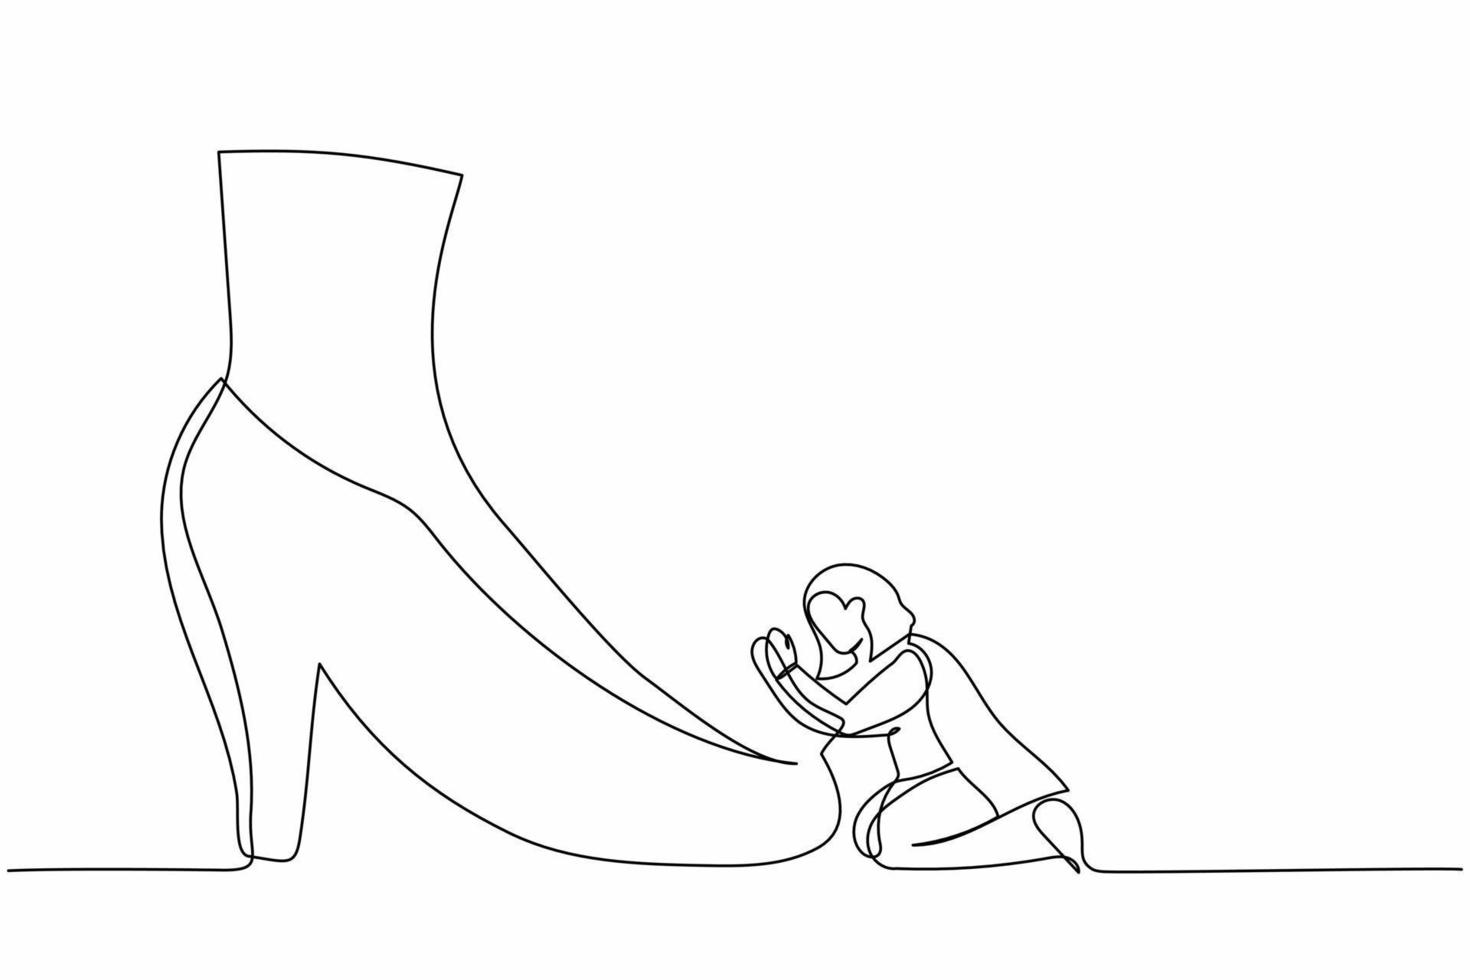 Continuous one line drawing businesswoman kneeling a giant foot or shoe. Female manager apologize to executive director. Minimal metaphor concept. Single line draw design vector graphic illustration